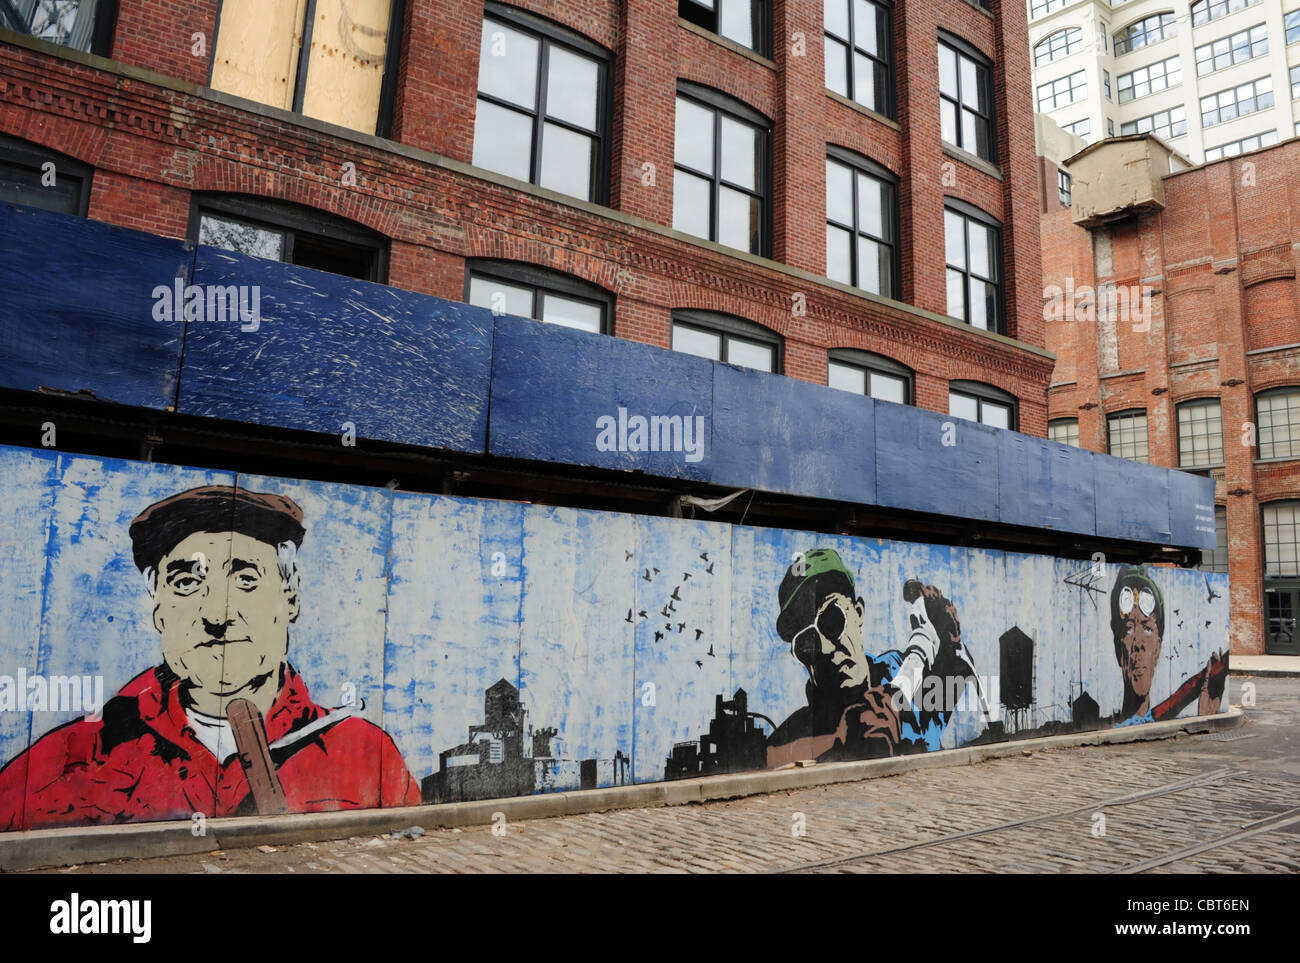 Artist Chris Stain's wall painting of 3 workers from Dumbo's industrial past, Plymouth Street at Washington Street, Brooklyn, NY Stock Photo